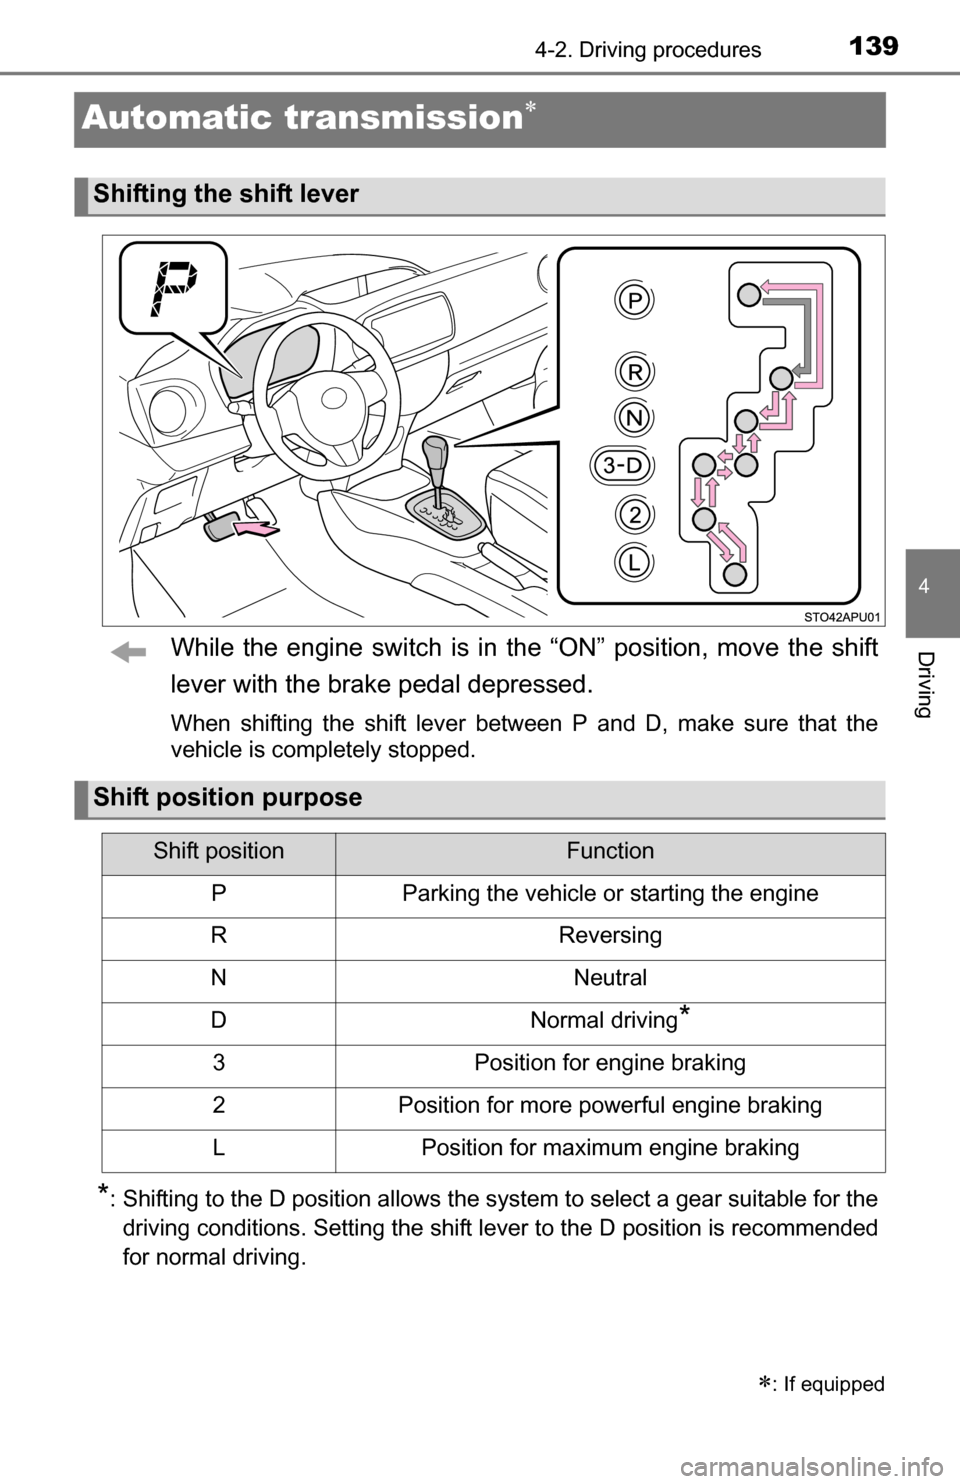 TOYOTA YARIS 2016 3.G Service Manual 1394-2. Driving procedures
4
Driving
Automatic transmission
While the engine switch is in the “ON” position, move the shift
lever with the brake pedal depressed.
When shifting the shift lever b